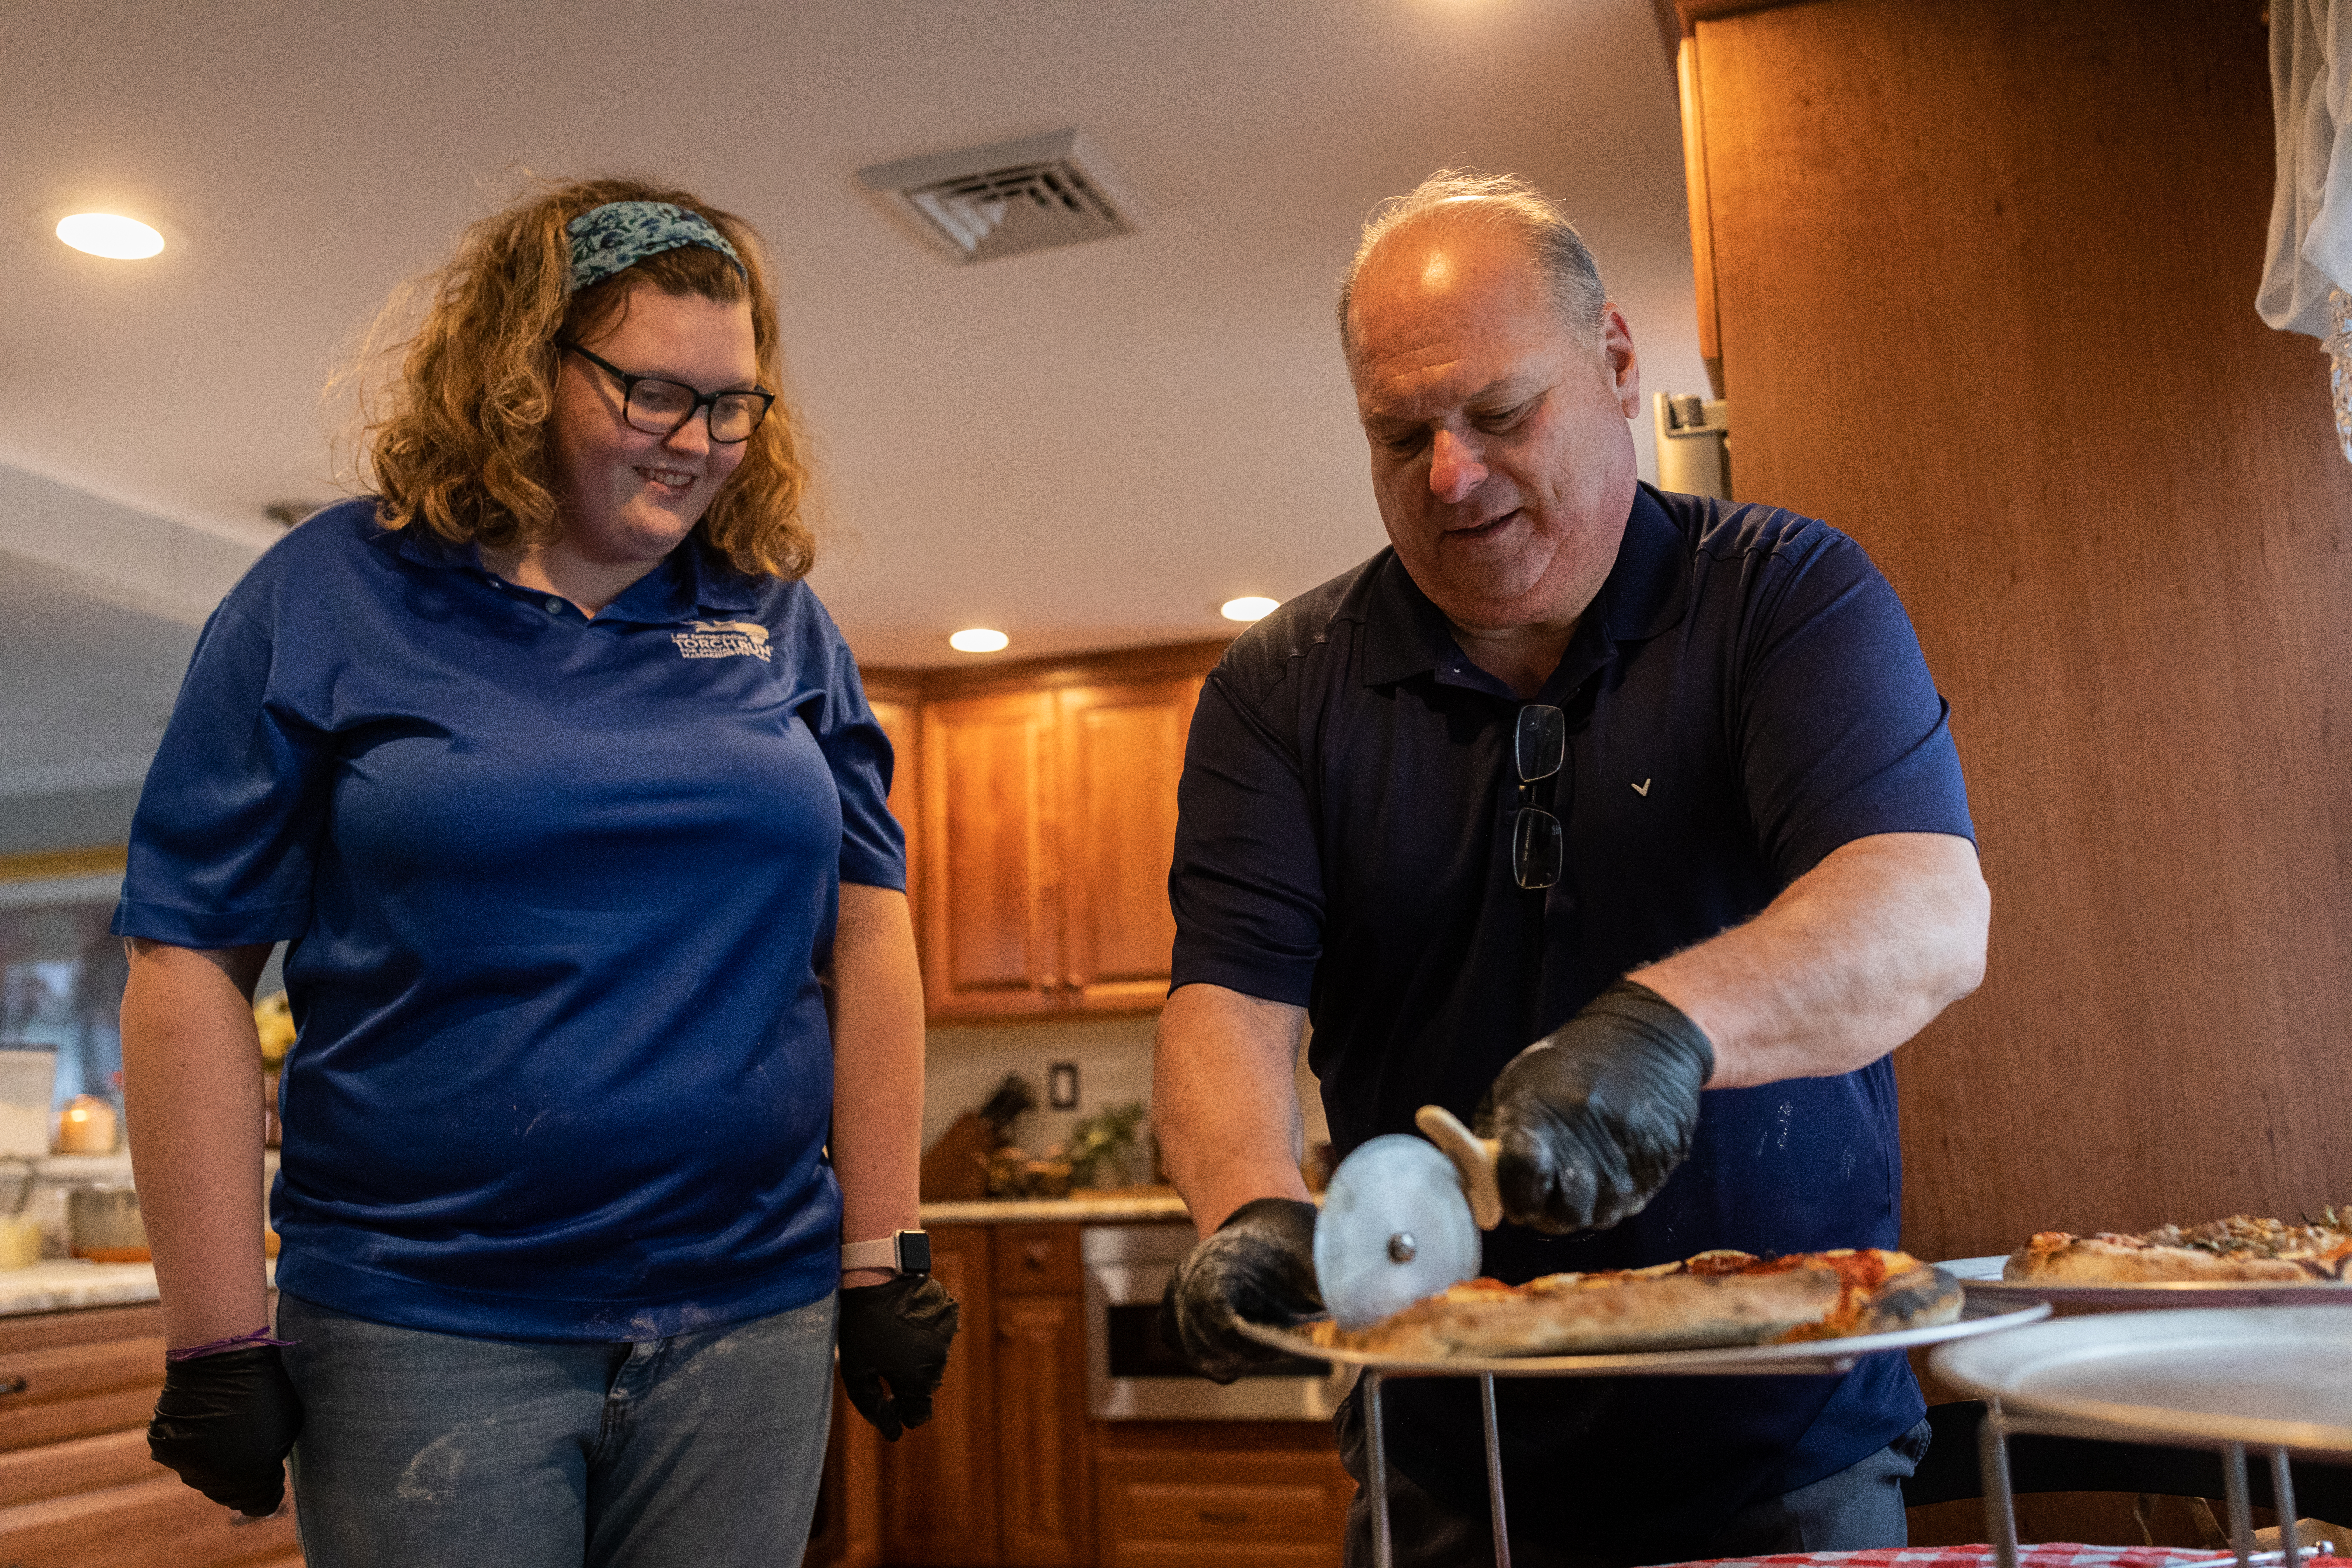 Meghan Colby, a Special Olympics athlete, watches as retired Middleton Police Chief Jim DiGianvittorio slices into a pizza during a live-streamed pizza cooking tutorial.